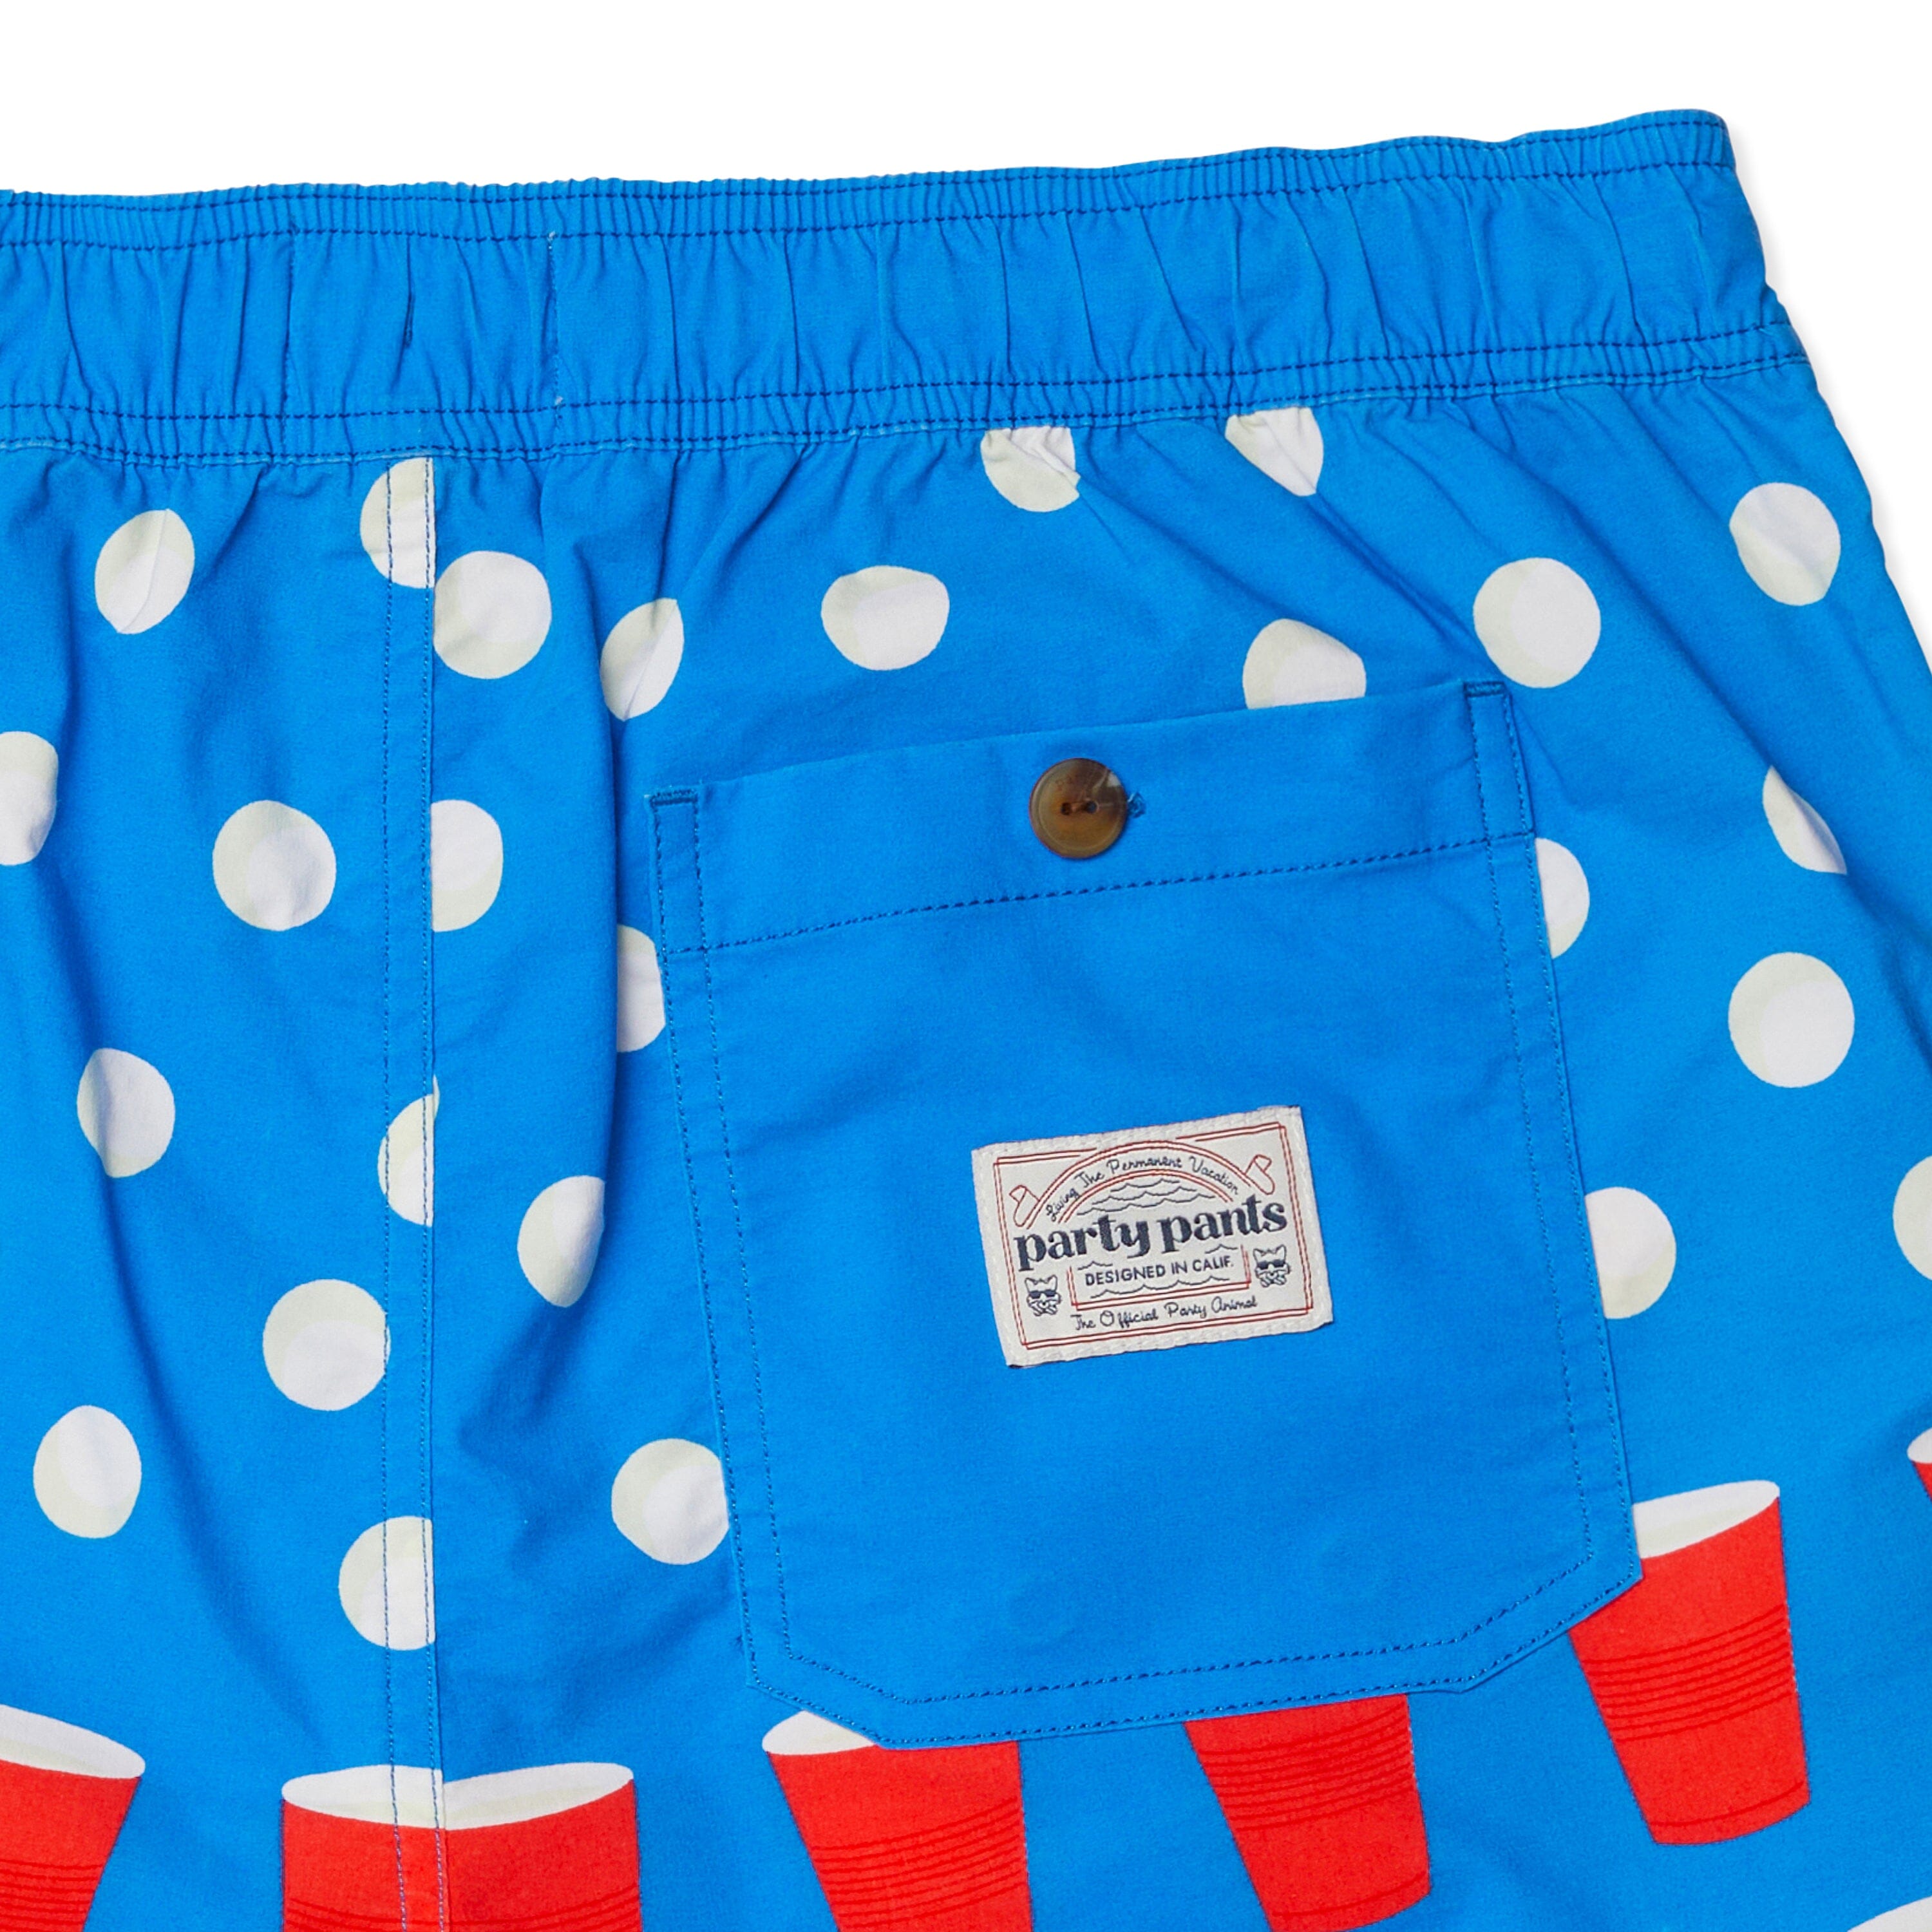 PONG PARTY STARTER SHORT - BLUE PRINTED SHORTS PARTY PANTS 